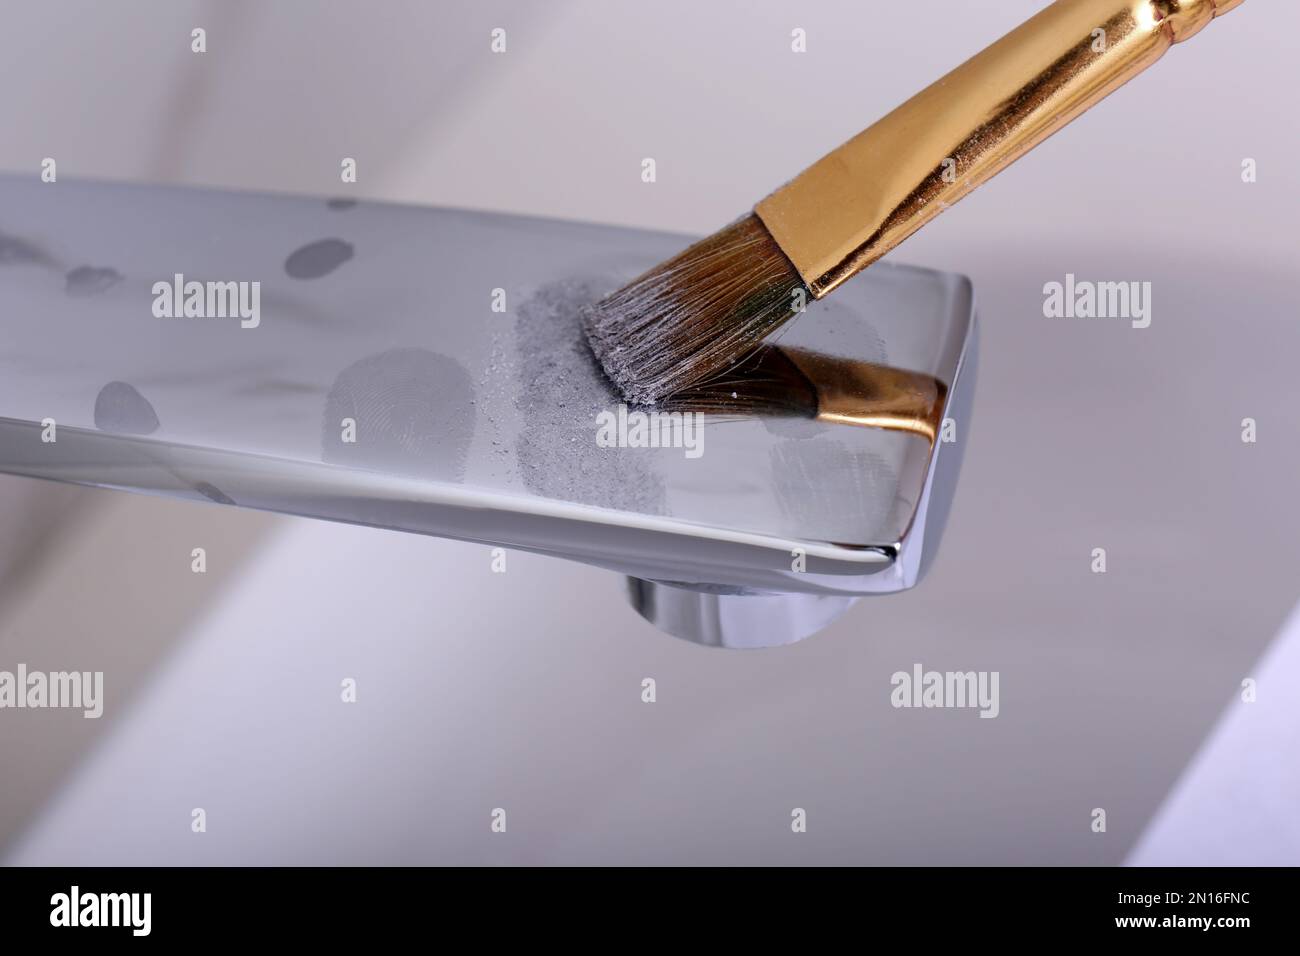 Using brush and powder to reveal fingerprints on faucet indoors, closeup Stock Photo